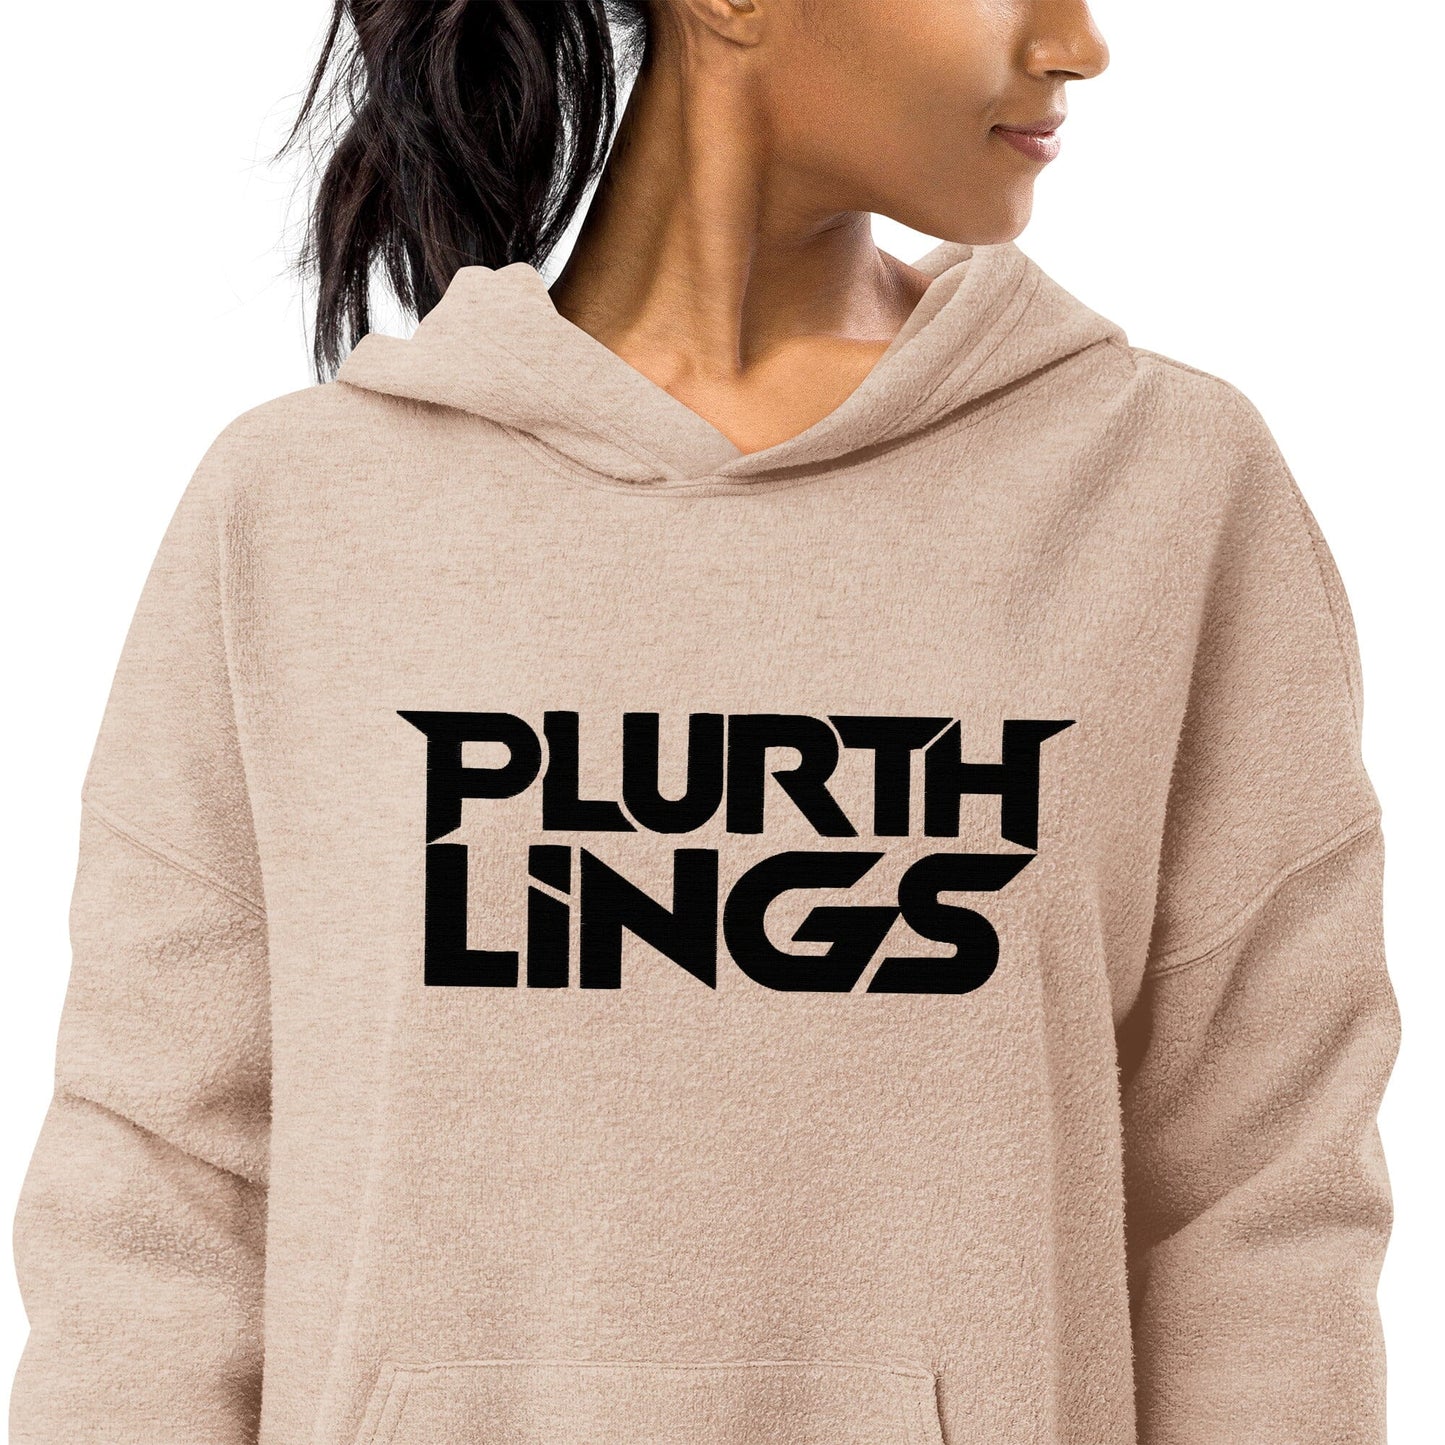 Plurthlings Embroidered Logo Eco-Sueded Fleece Hoodie PLURTHLINGS Heather Oat XS 